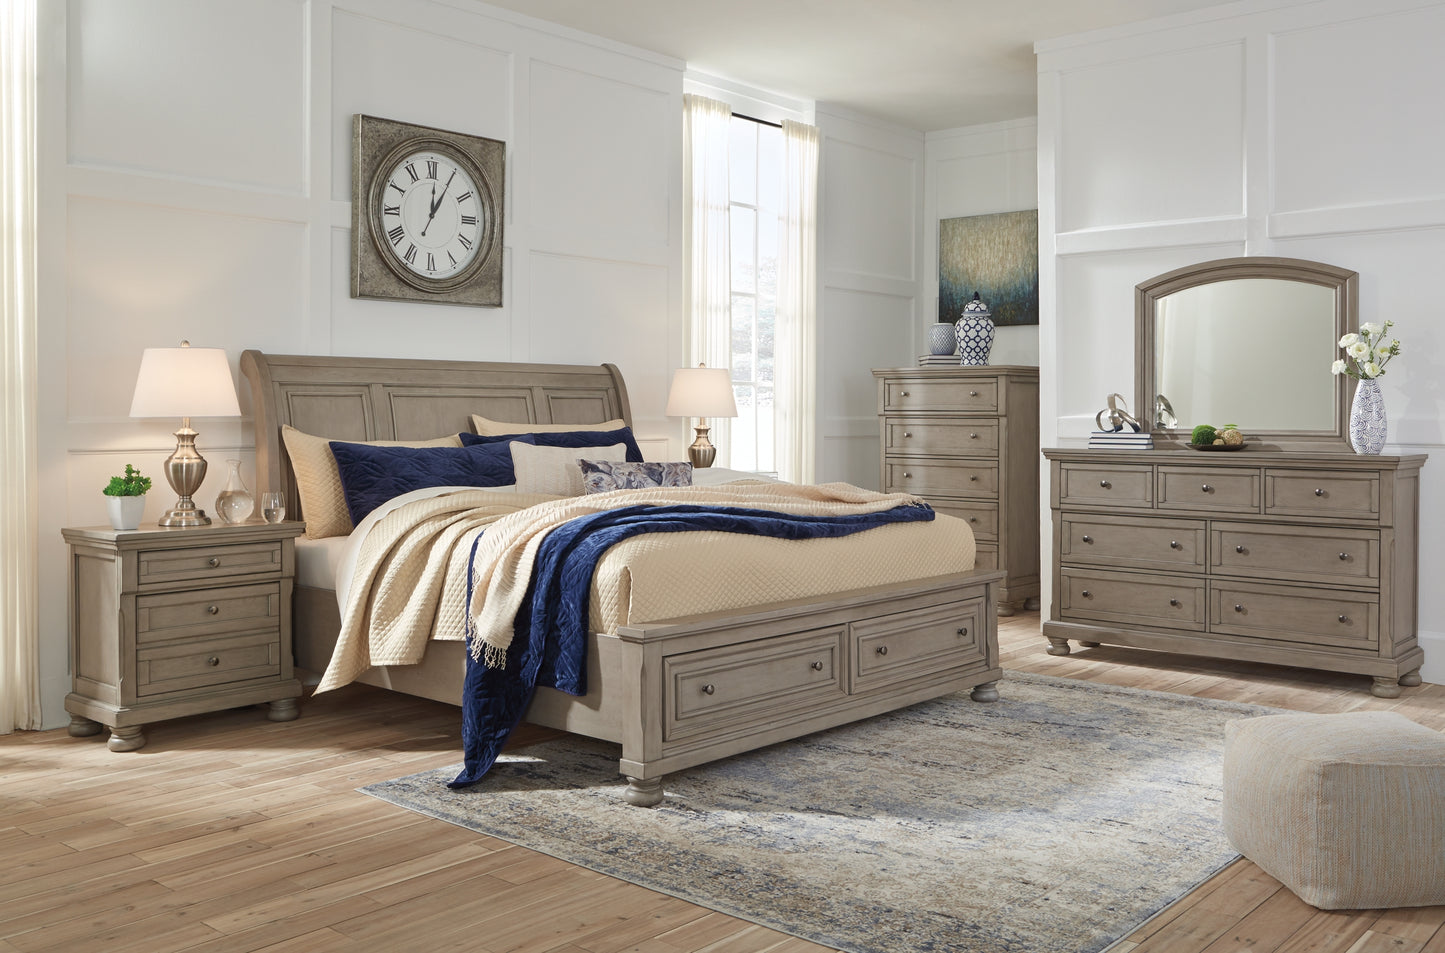 Lettner King Sleigh Bed with 2 Storage Drawers with Mirrored Dresser, Chest and 2 Nightstands Wilson Furniture (OH)  in Bridgeport, Ohio. Serving Bridgeport, Yorkville, Bellaire, & Avondale